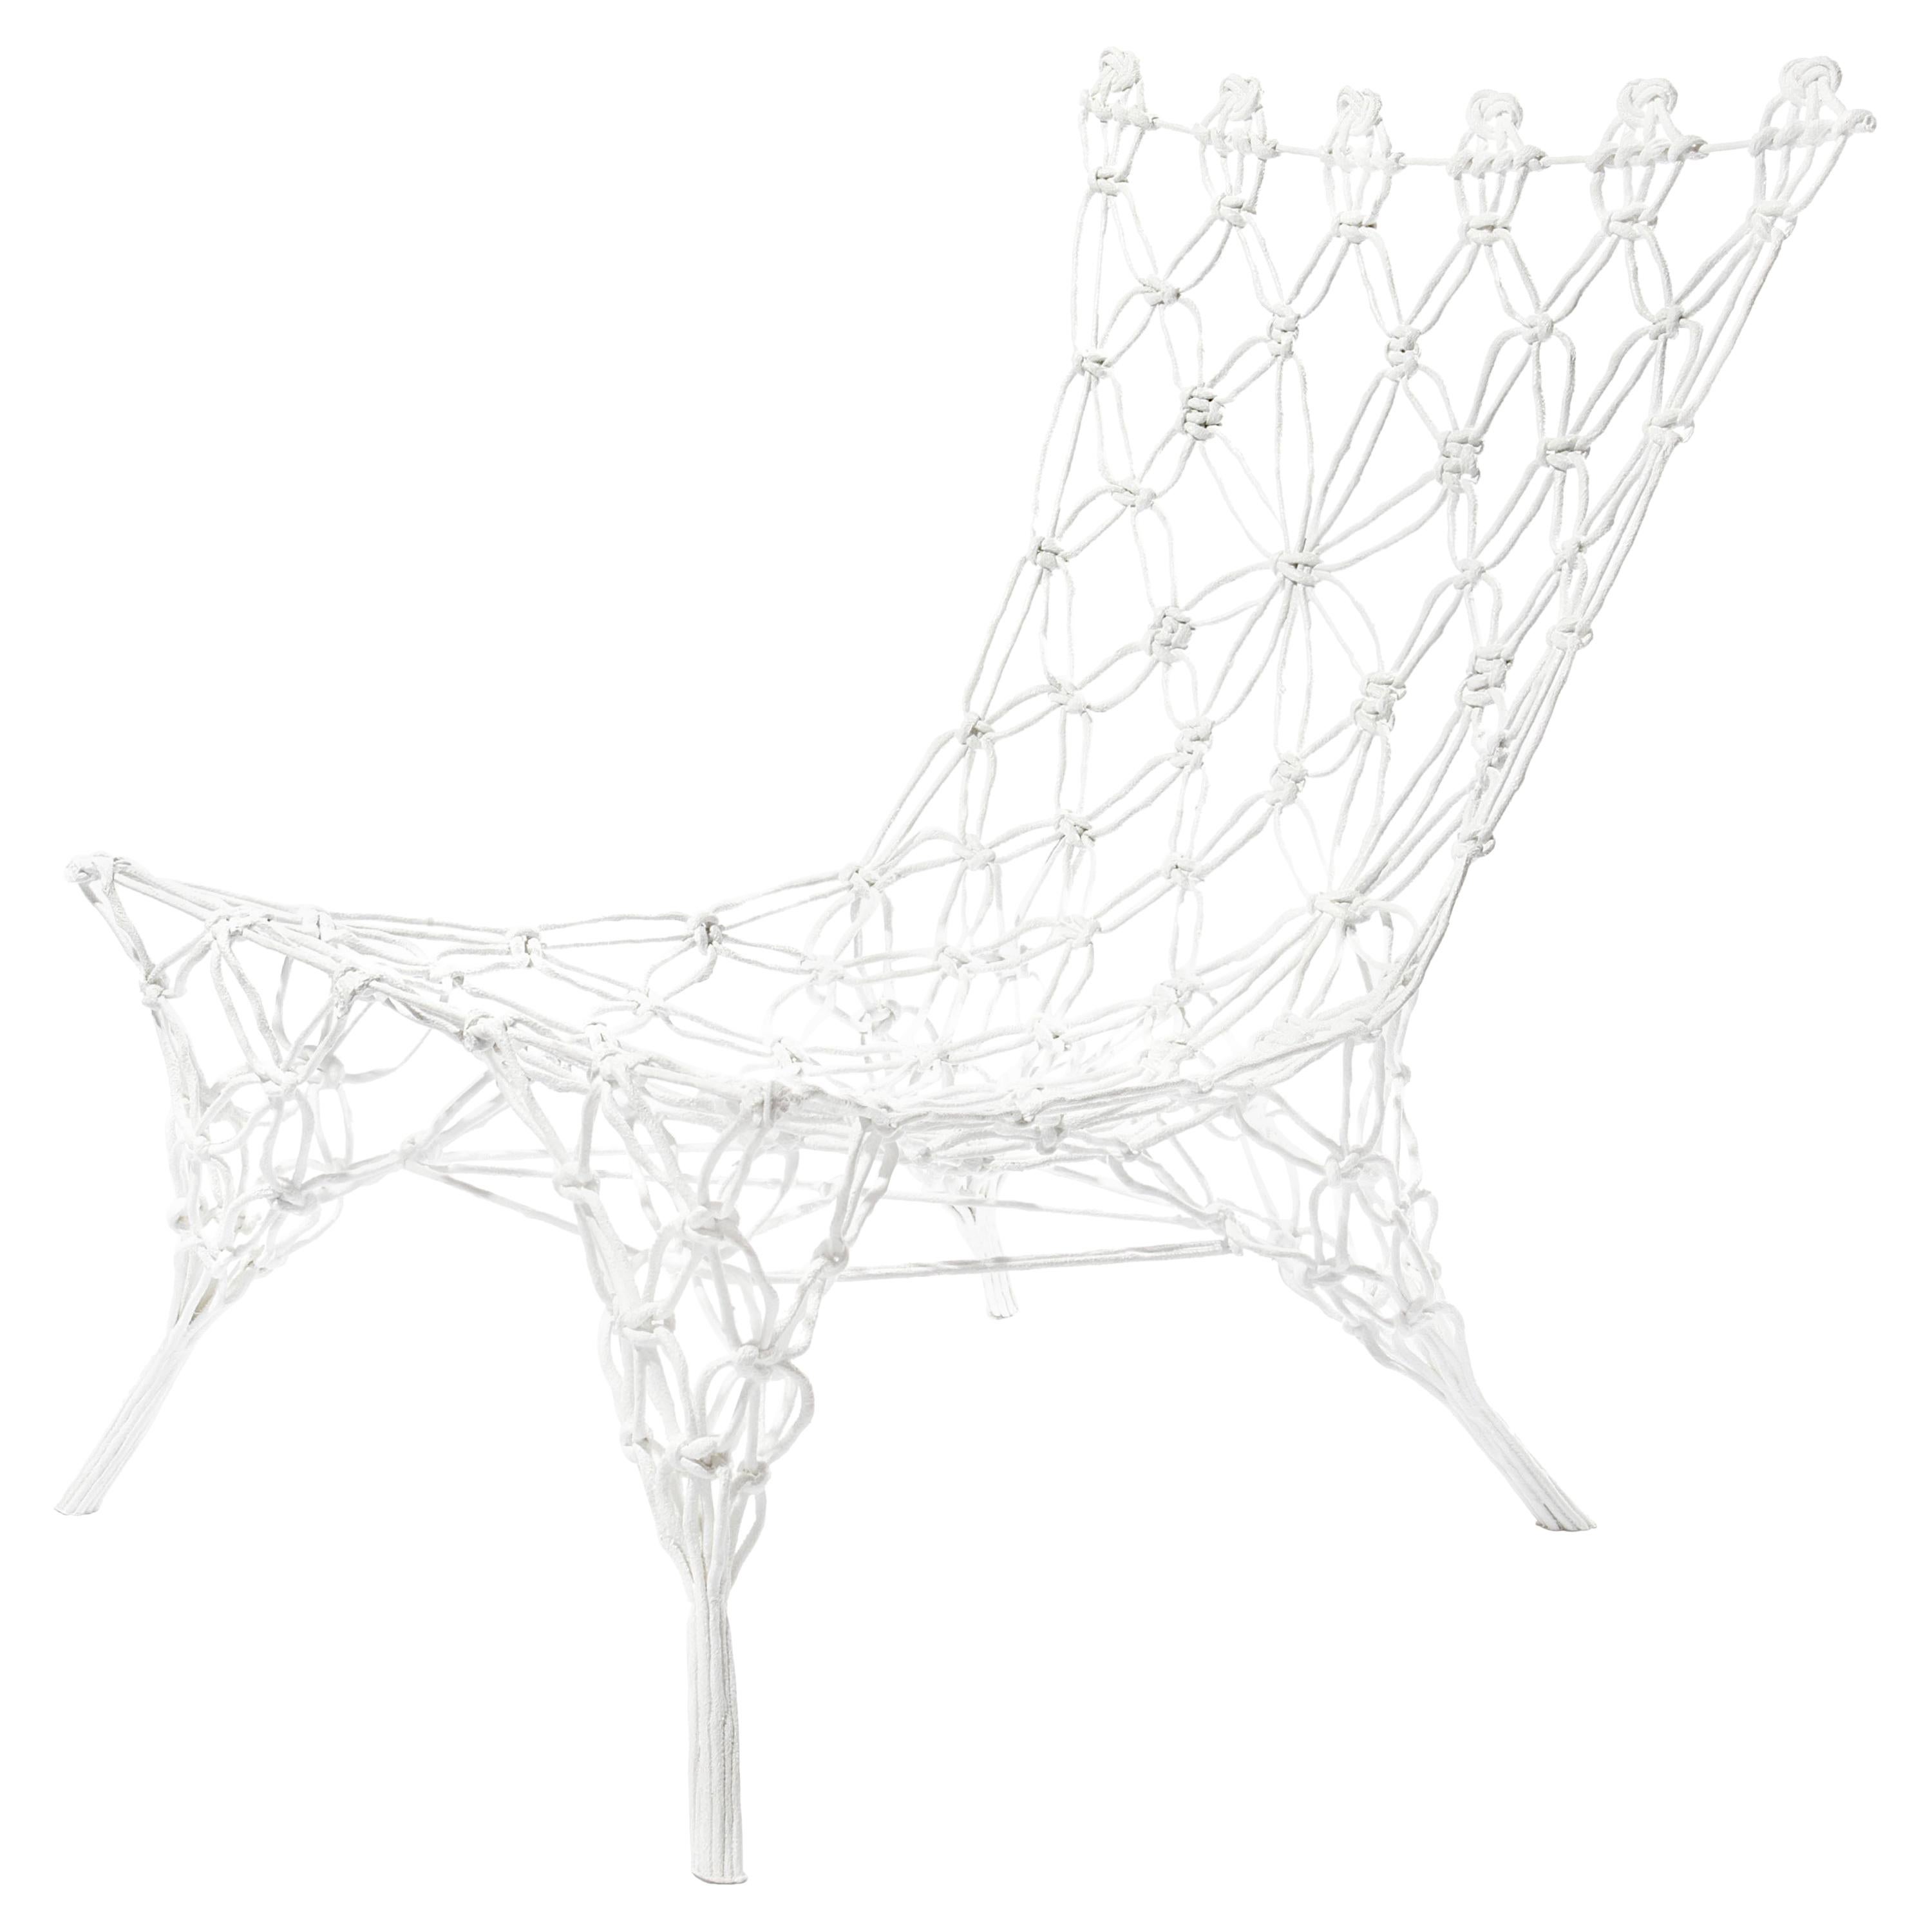 Knotted Chair, White, by Marcel Wanders, Hand-Knotted Chair, 2007, Unique